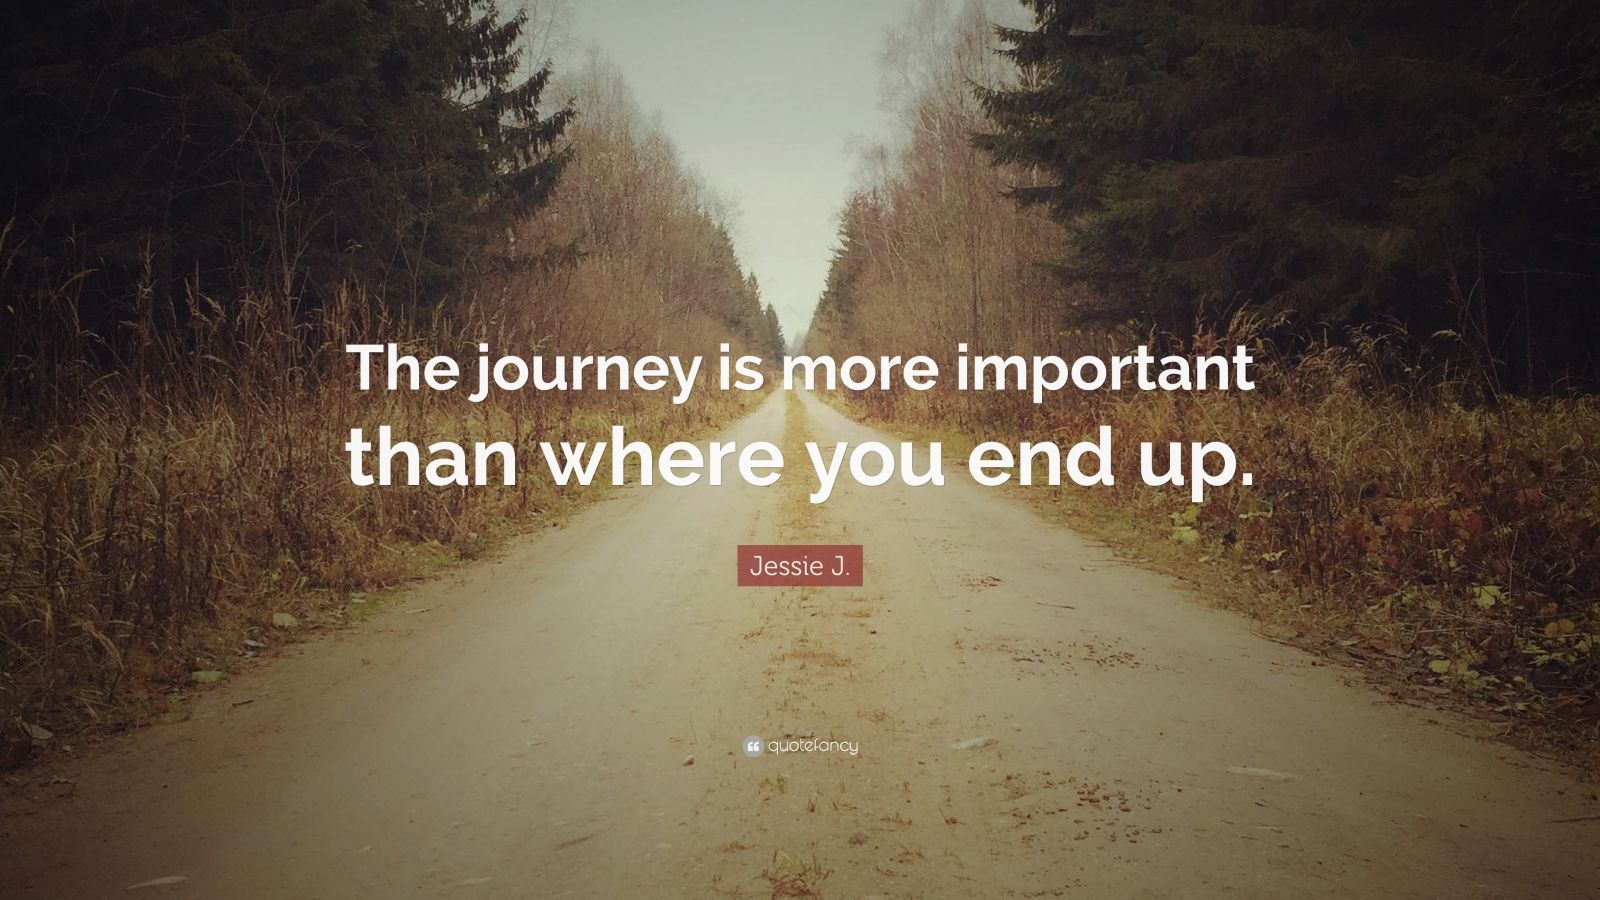 the journey is usually the part that you remember